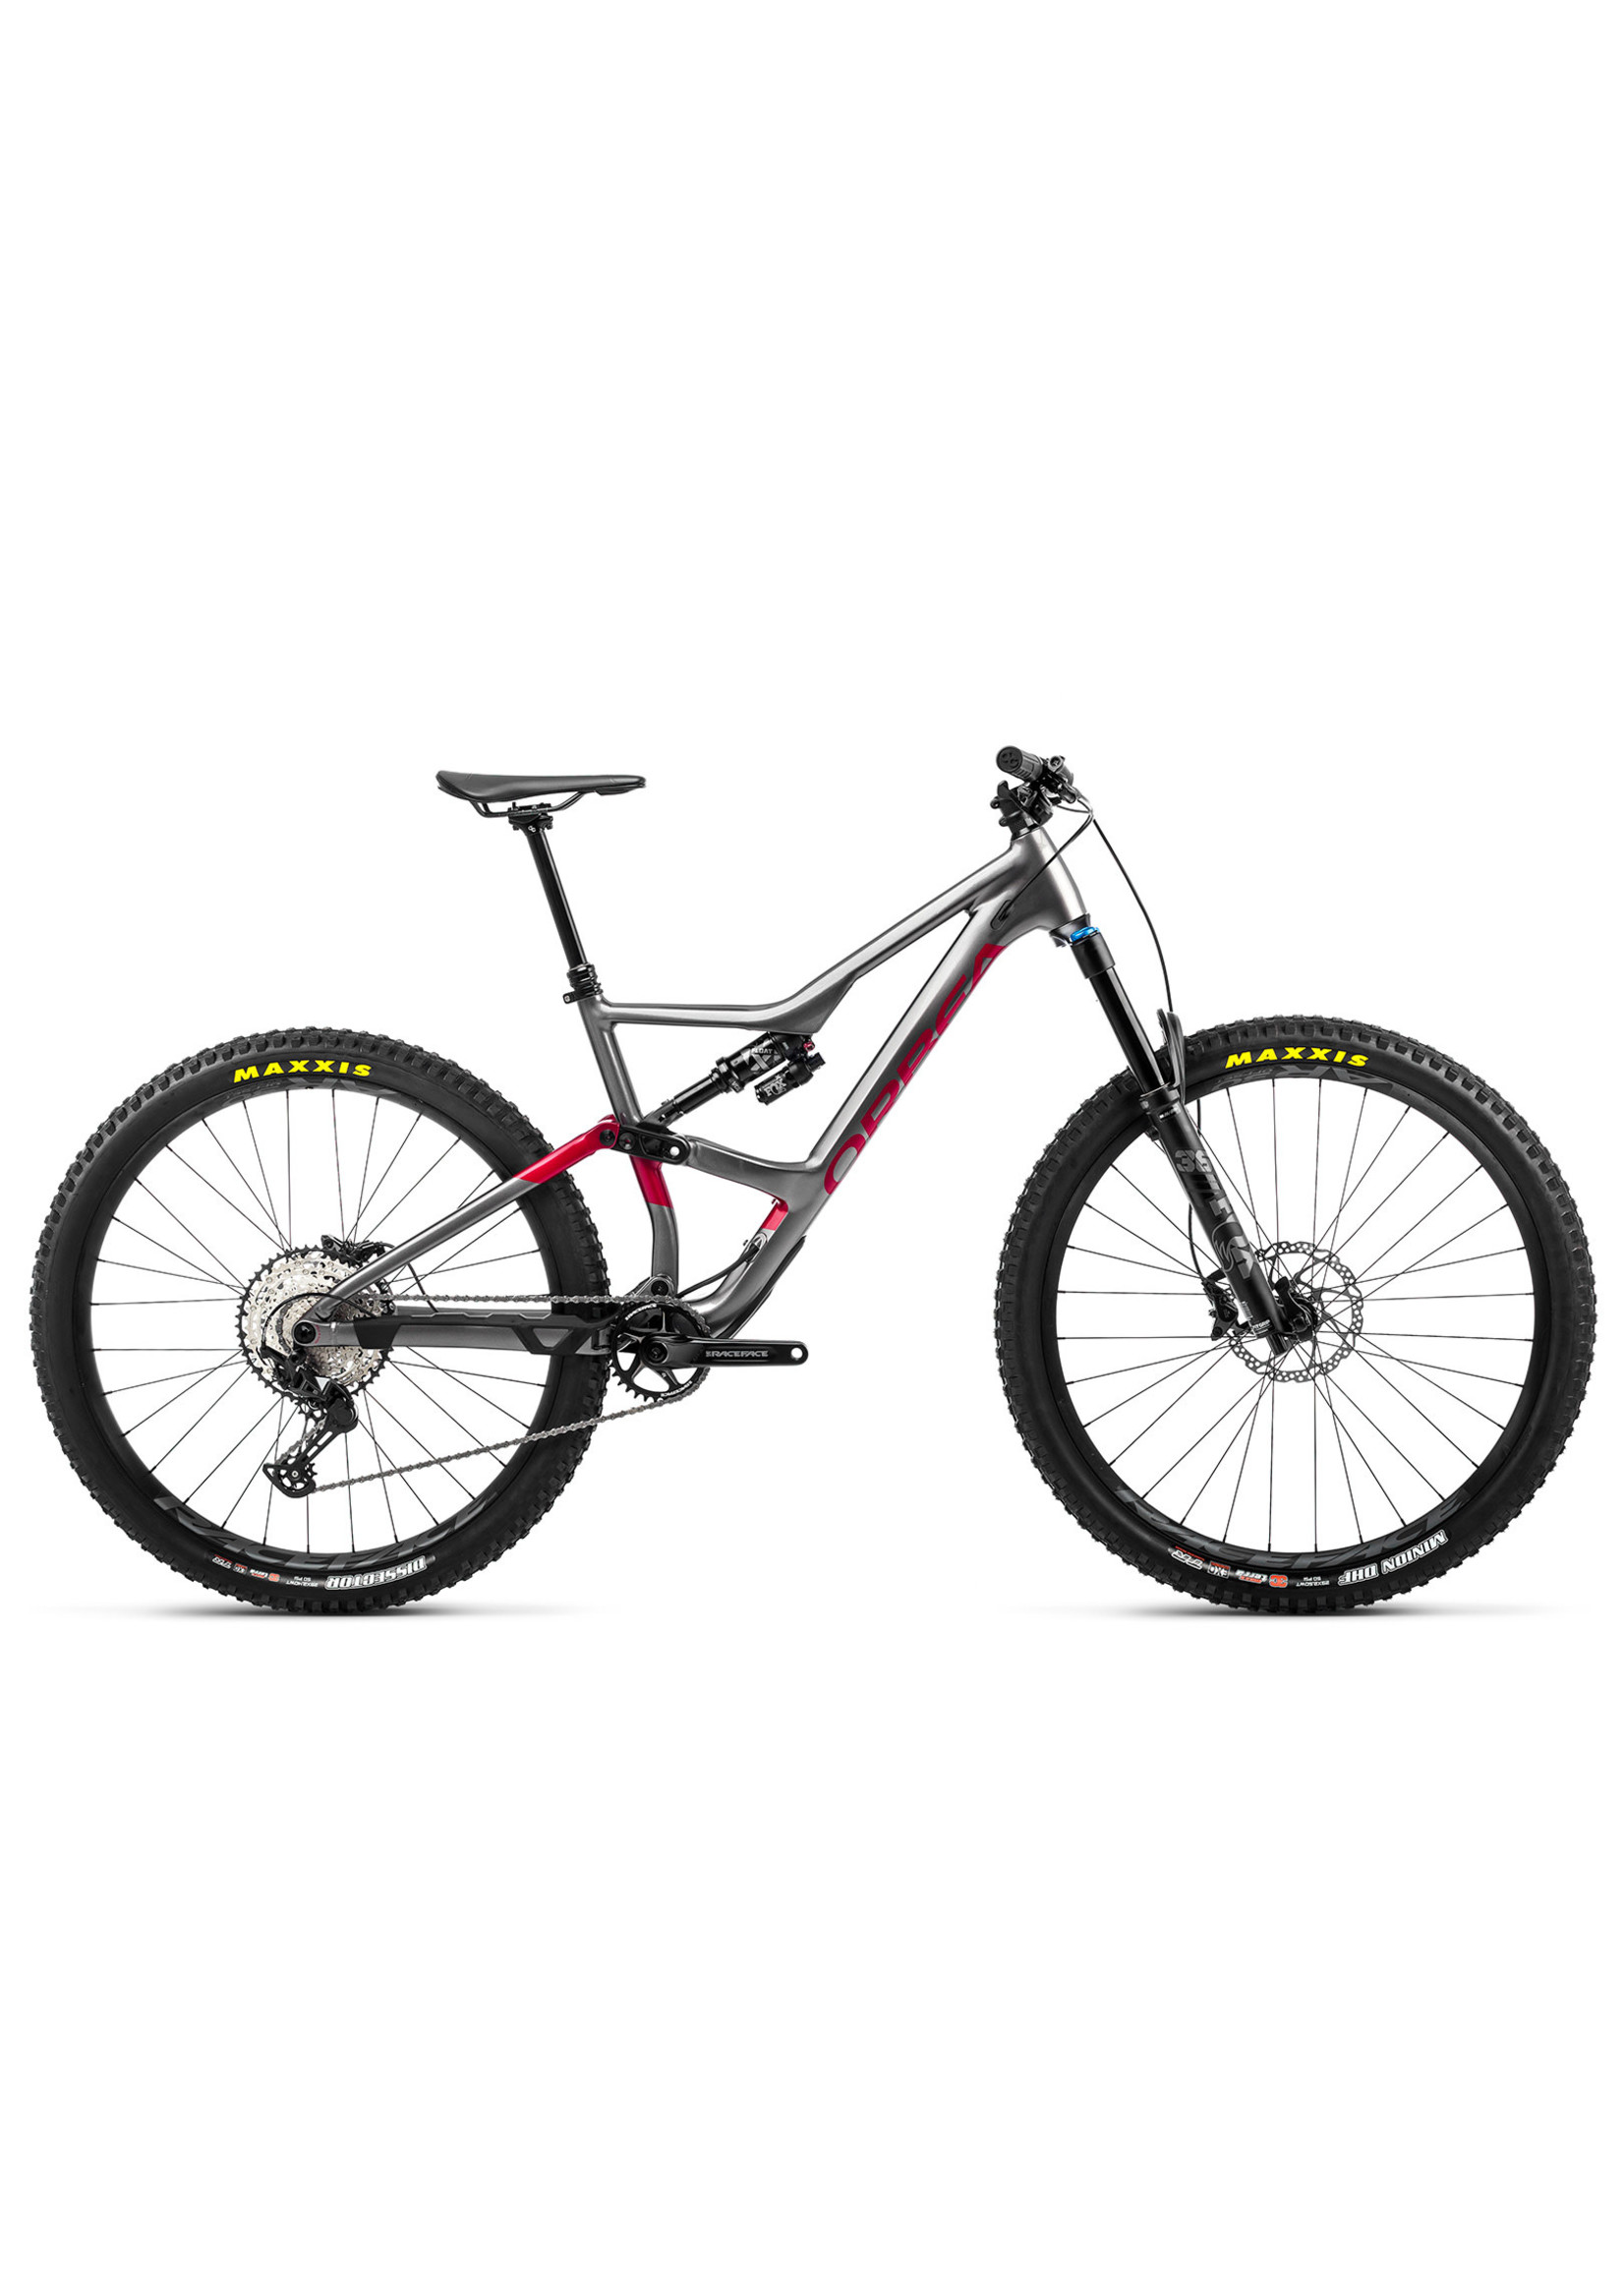 2022 Orbea Occam H20 LT Anth/Ros MD